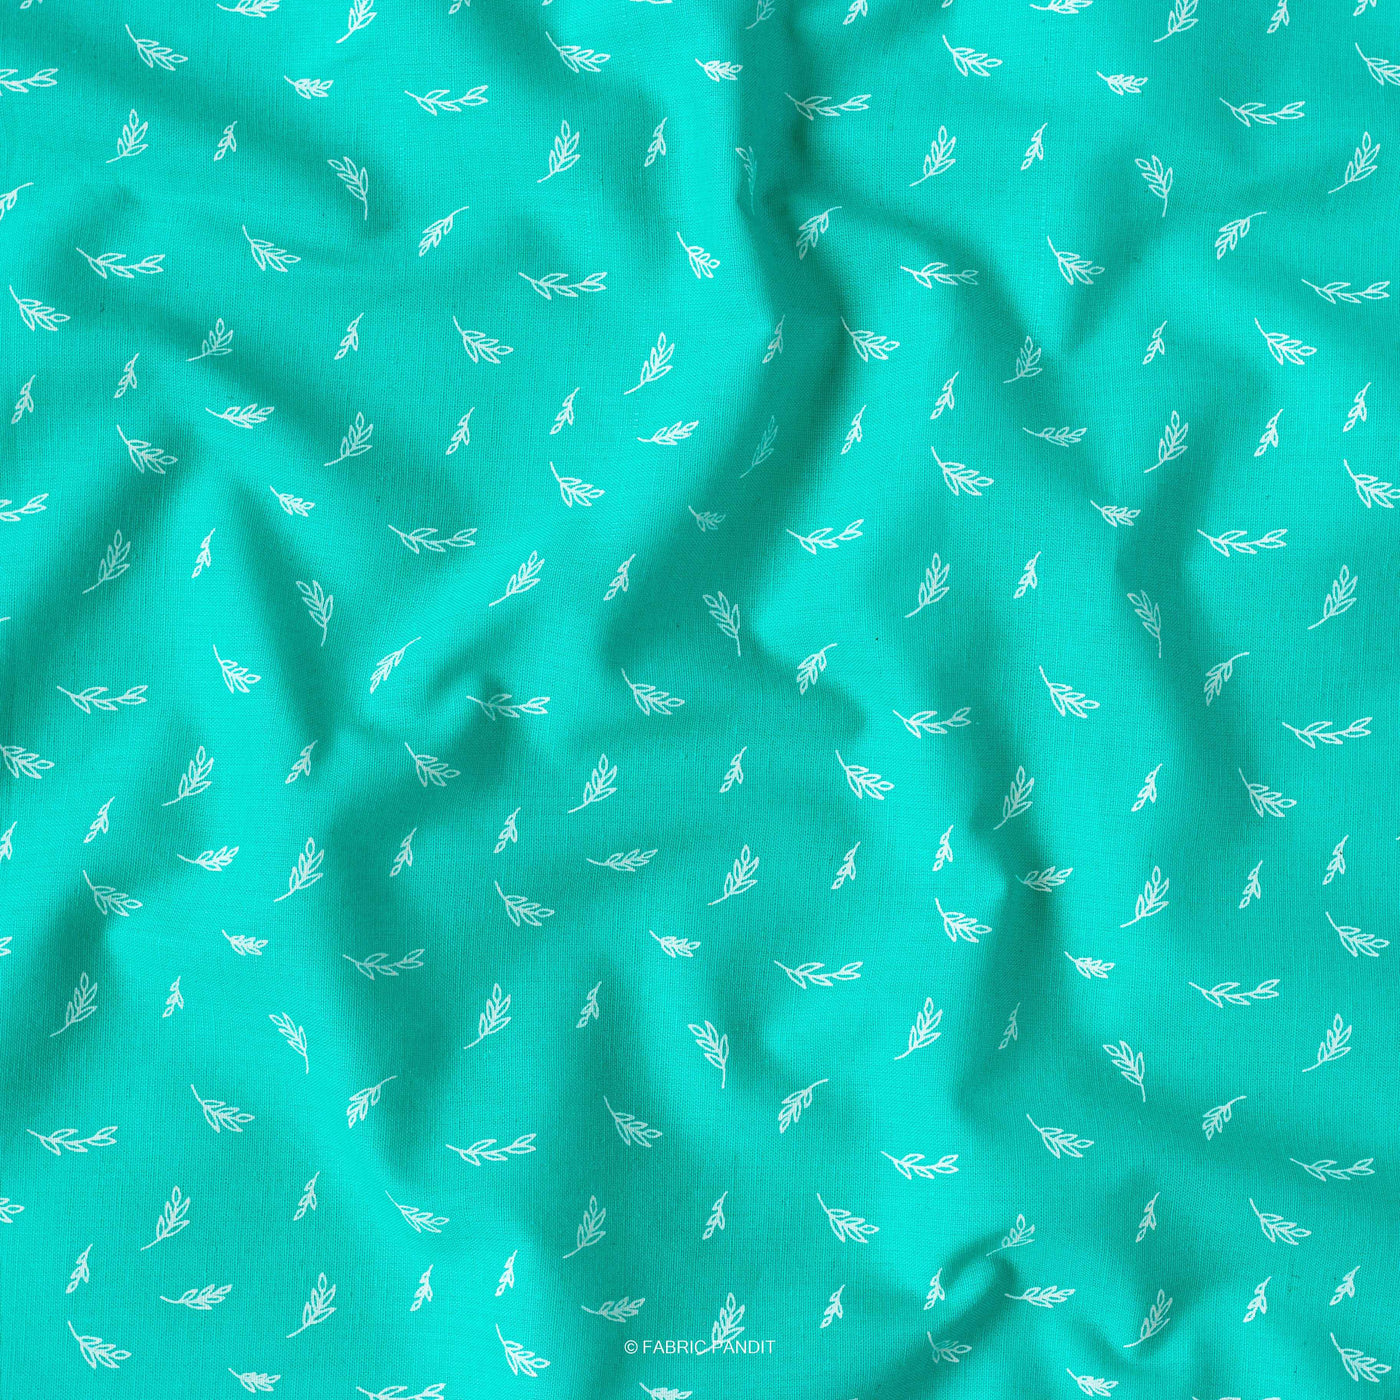 Fabric Pandit Cut Piece 0.25M (CUT PIECE) Bright Turquoise Color Block Printed Cotton Linen Fabric (Width 42 Inches)